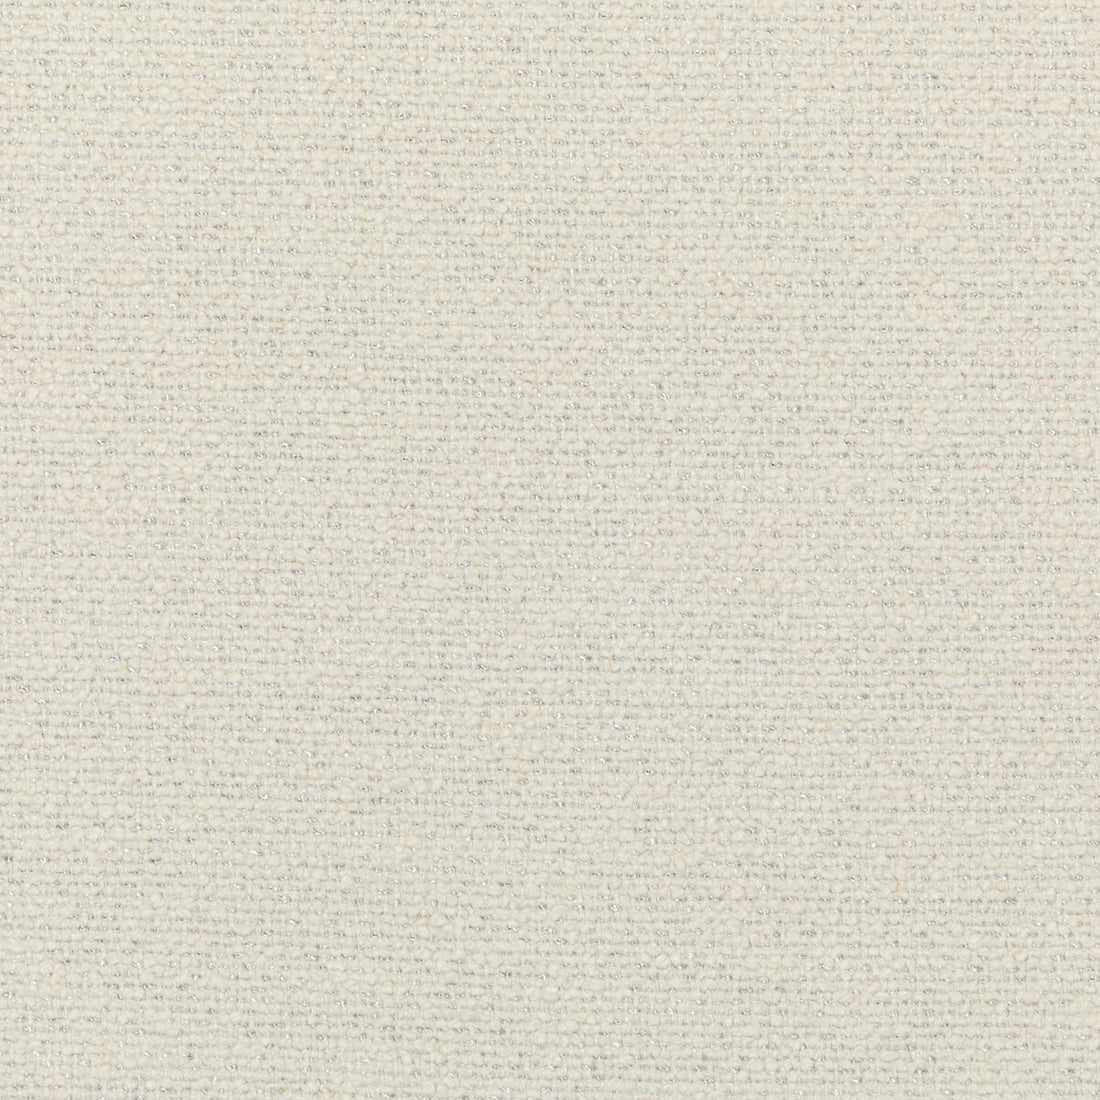 Bali Boucle fabric in ivory color - pattern 36051.1.0 - by Kravet Couture in the Luxury Textures II collection